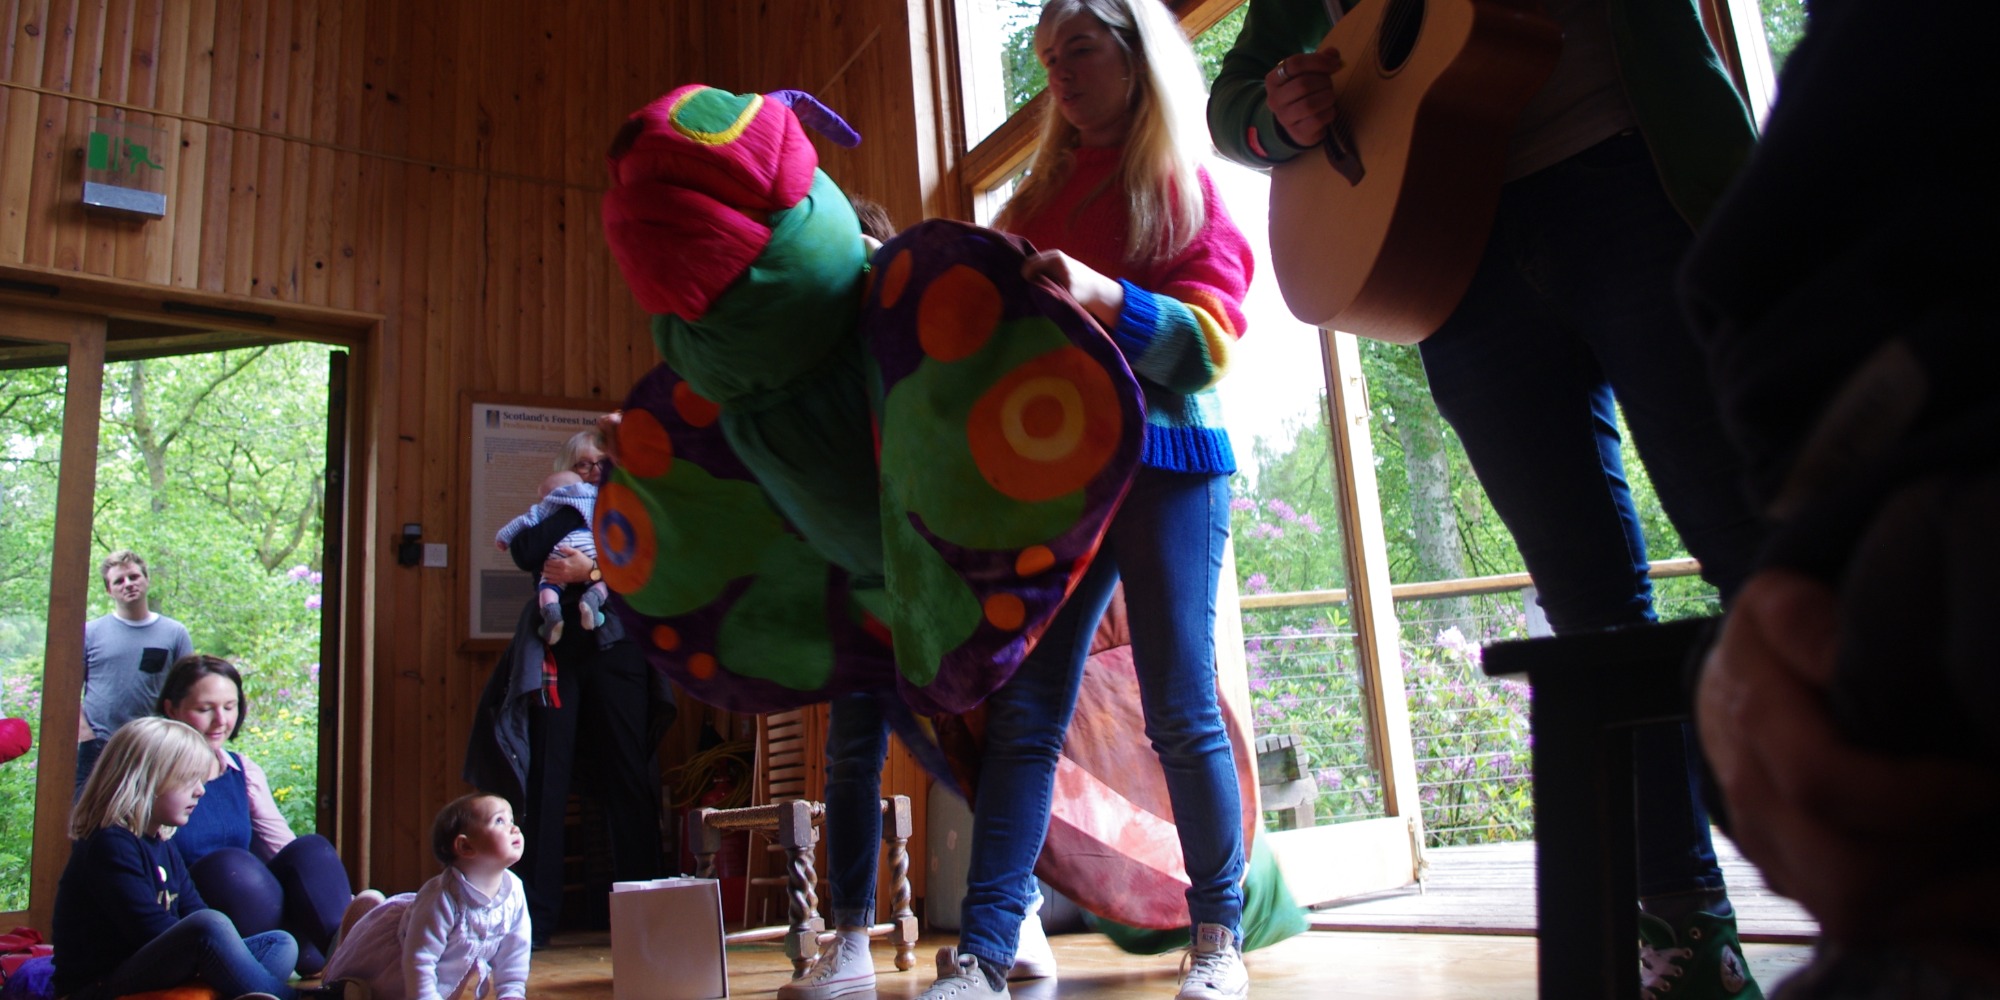 People inside a building made of wood, a person holds up a fabric made butterfly of various colours